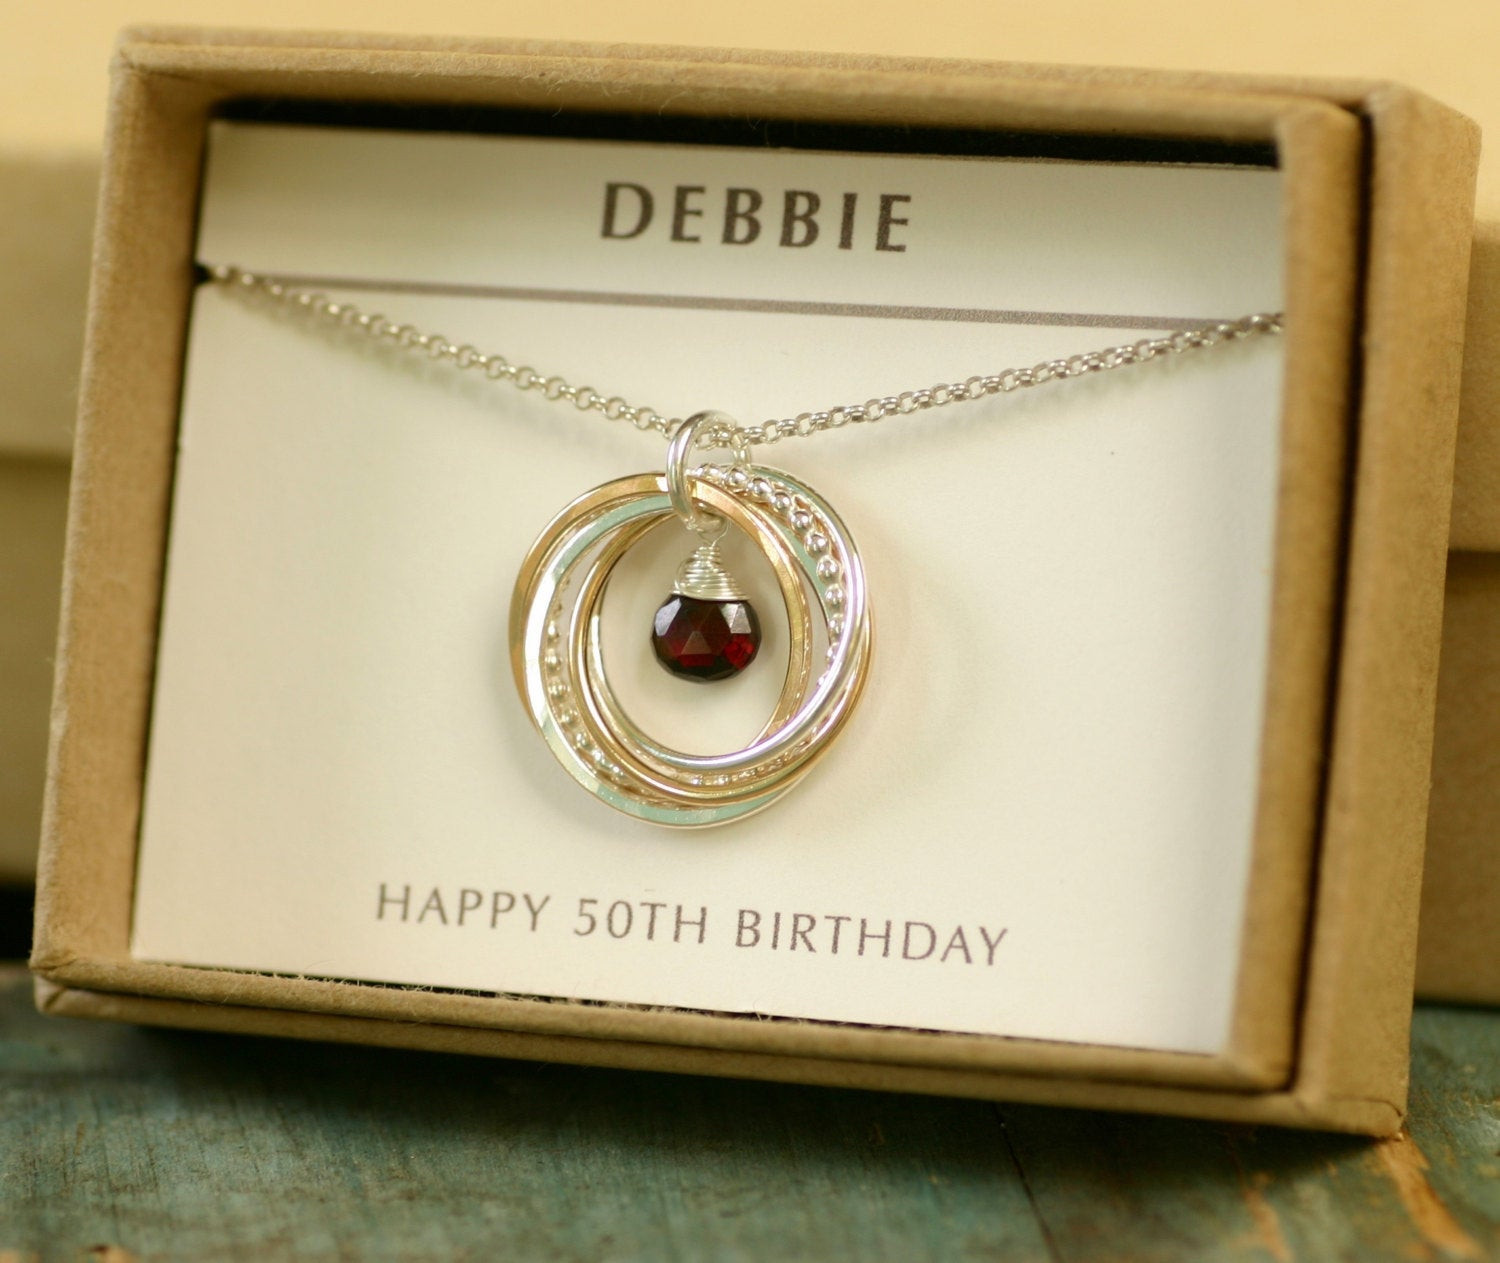 Birthday Gifts For Her
 Garnet necklace for her 50th birthday t for bestfriend